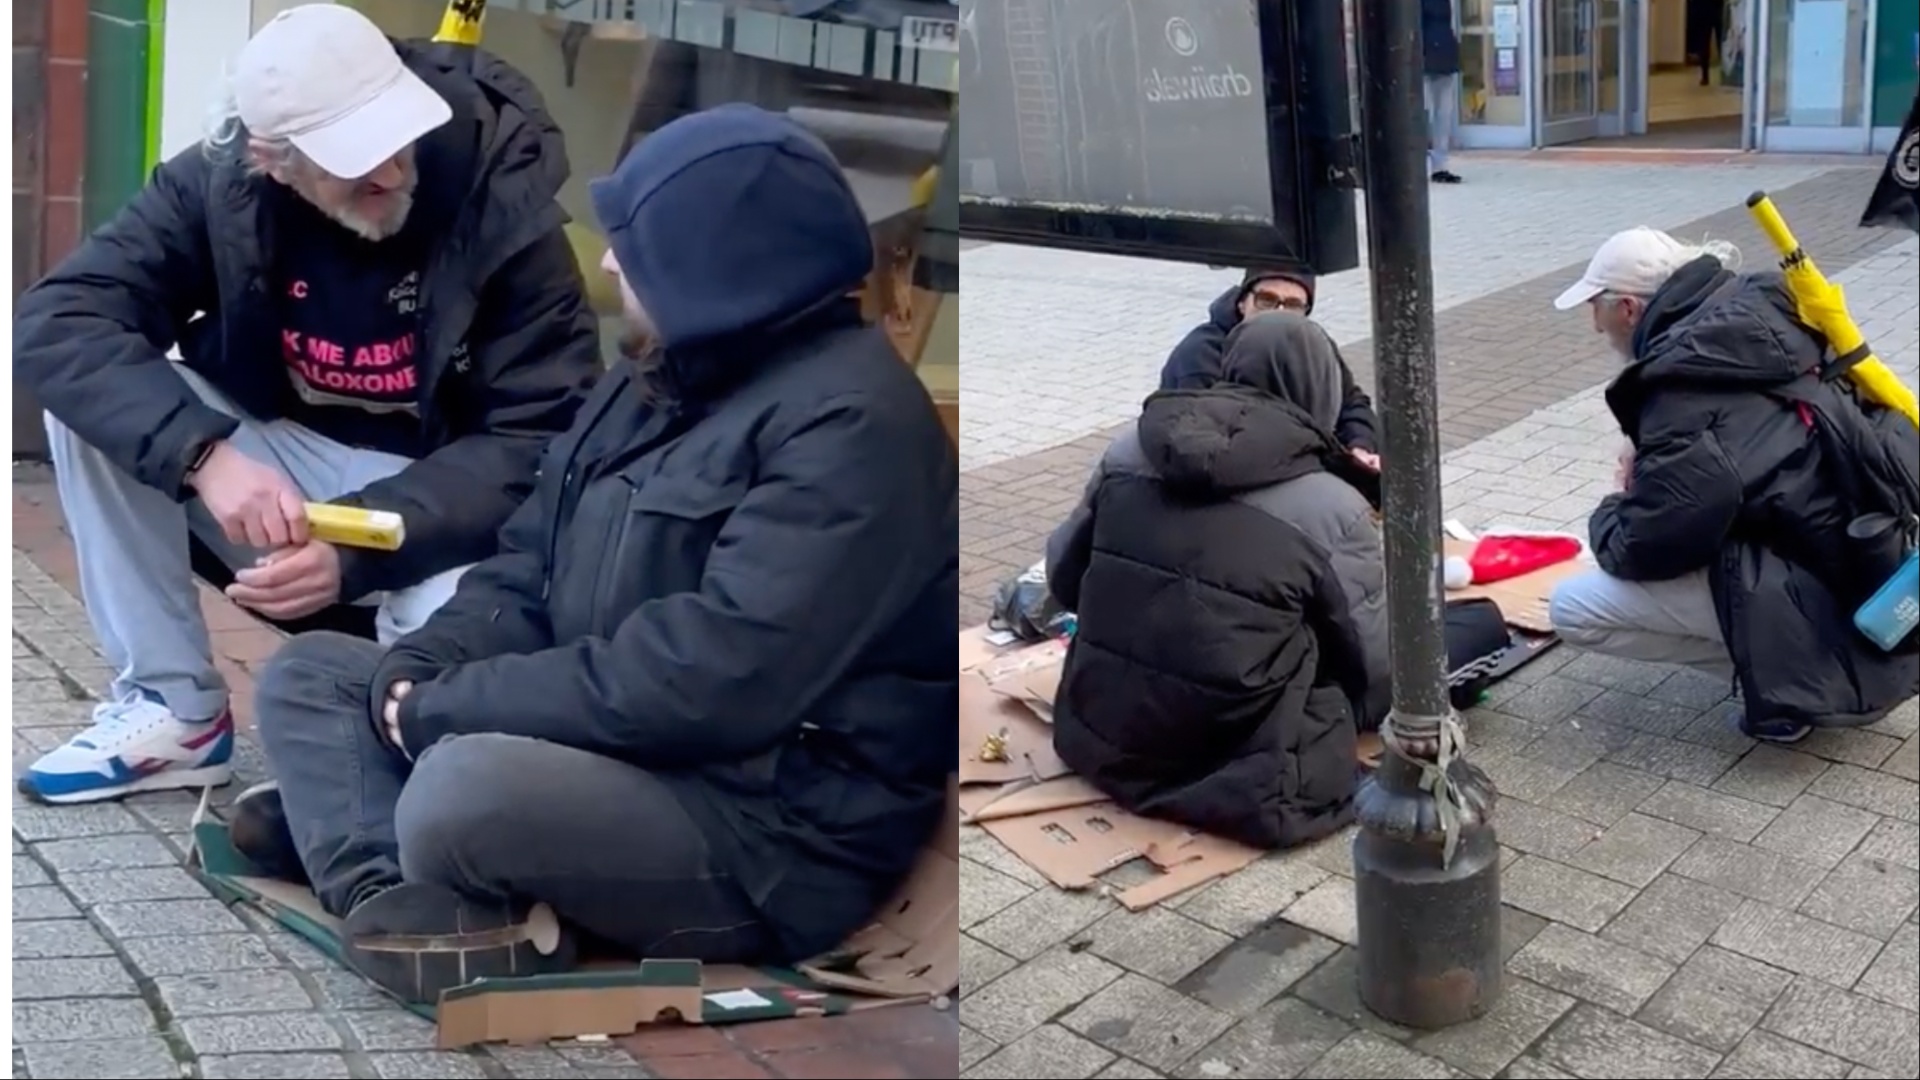 'Mighty' Mick Bird and George speak to the homeless on the street about Naloxone.